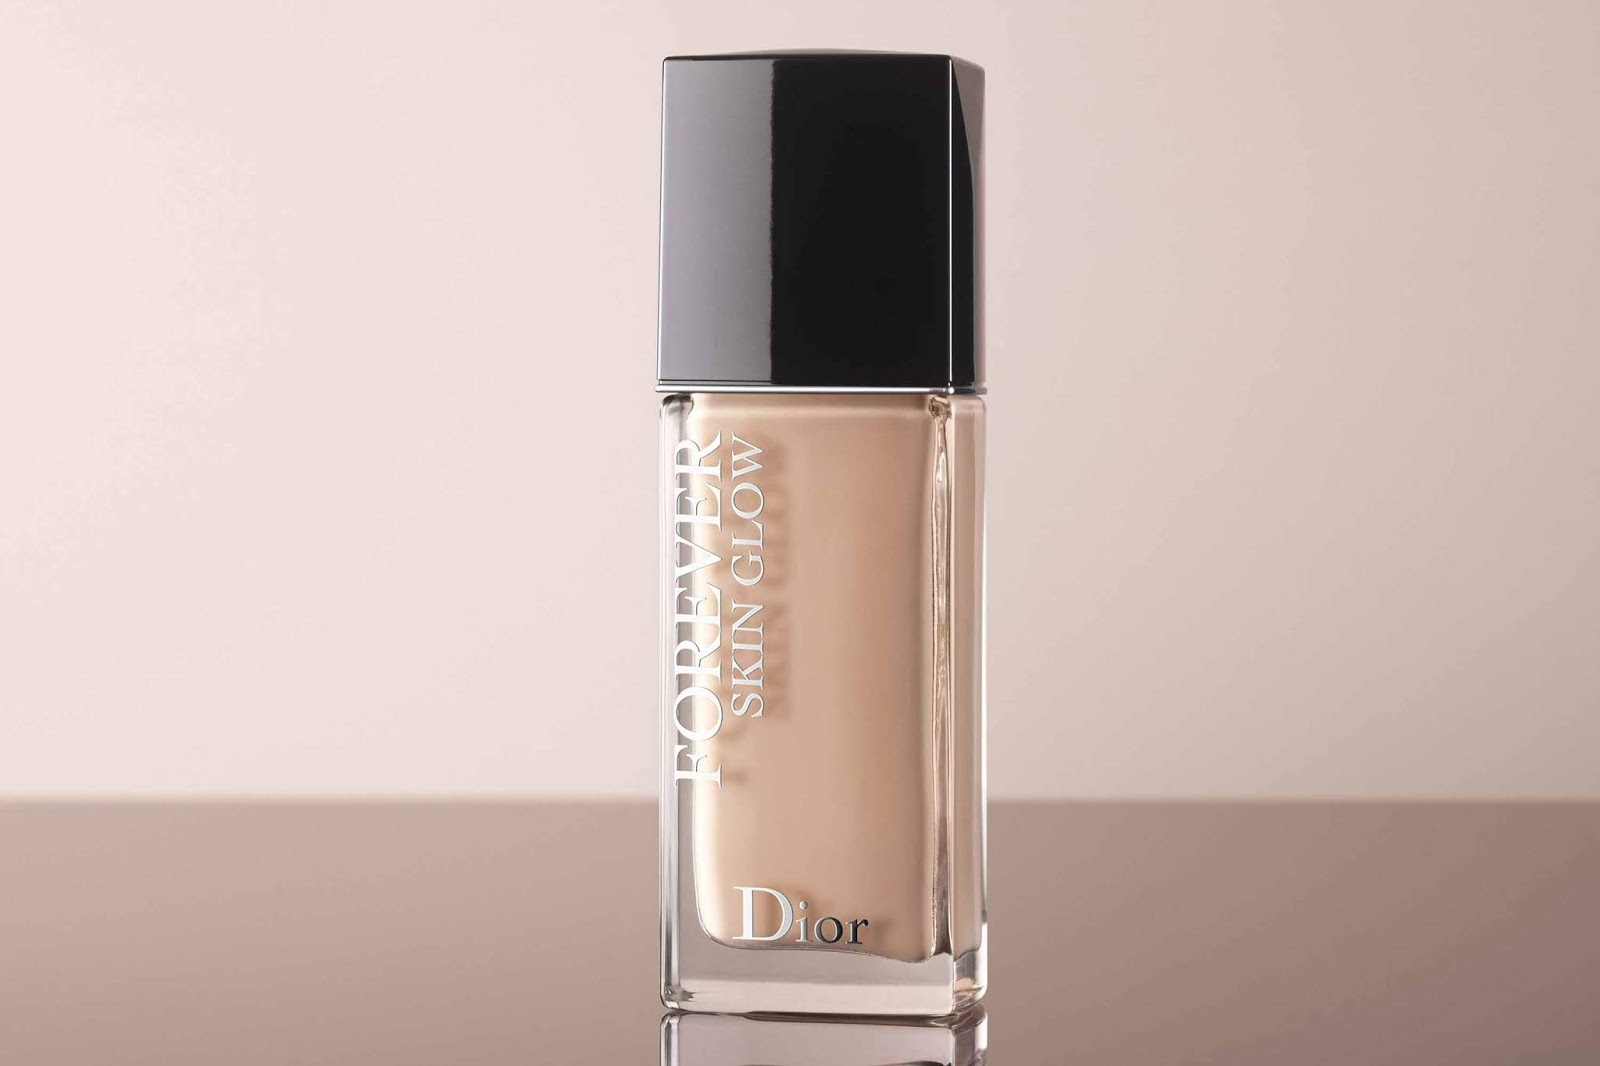 dior foundation glow review